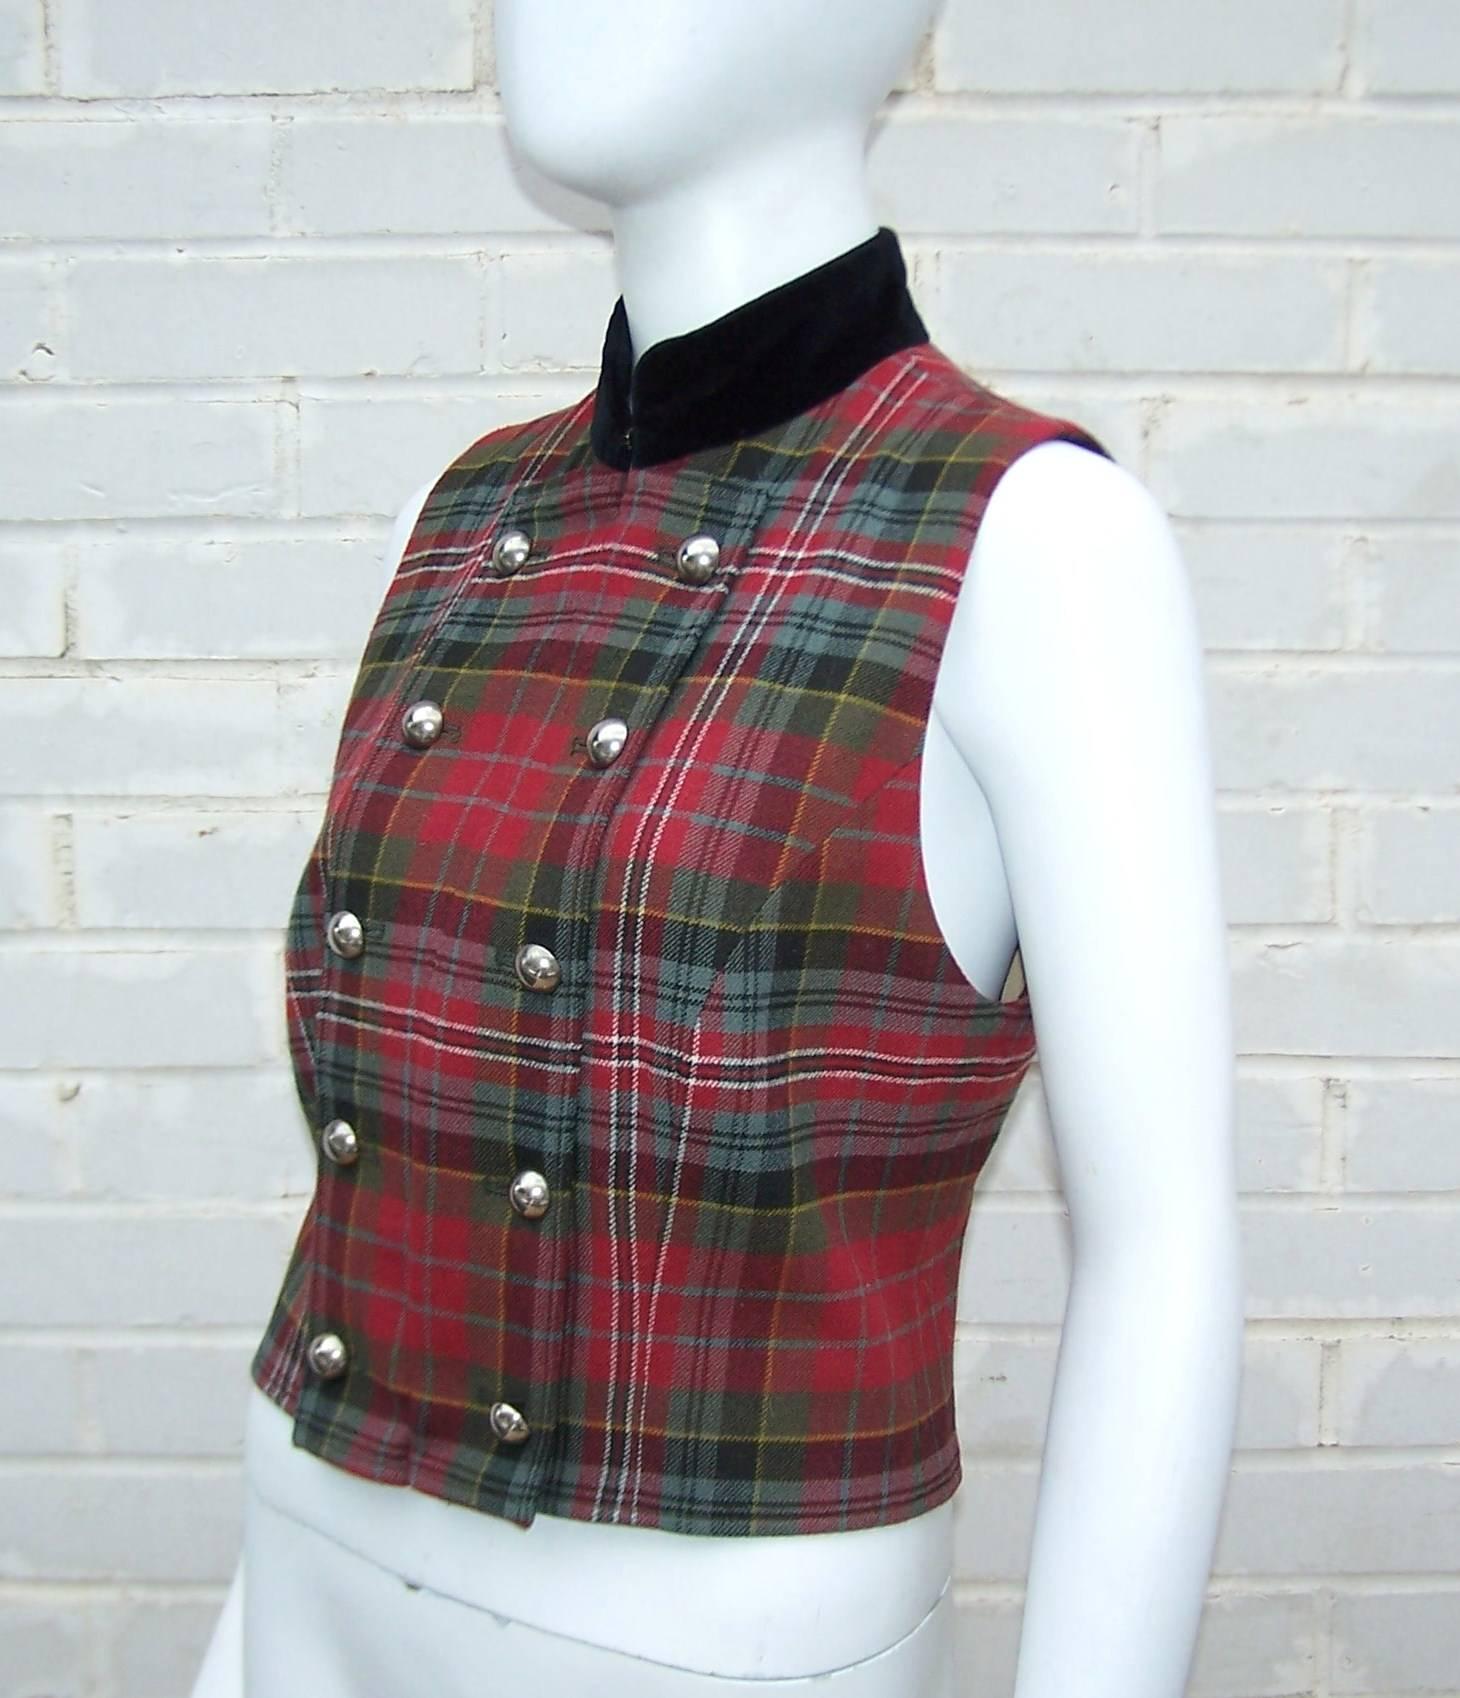 Add this Ralph Lauren vest to a simple pant and blouse ensemble for a fashionable military look.  The fine wool plaid is a brick red and gray combination with silver tone dome buttons and a black velvet collar.  It hooks at the top and is lined in a